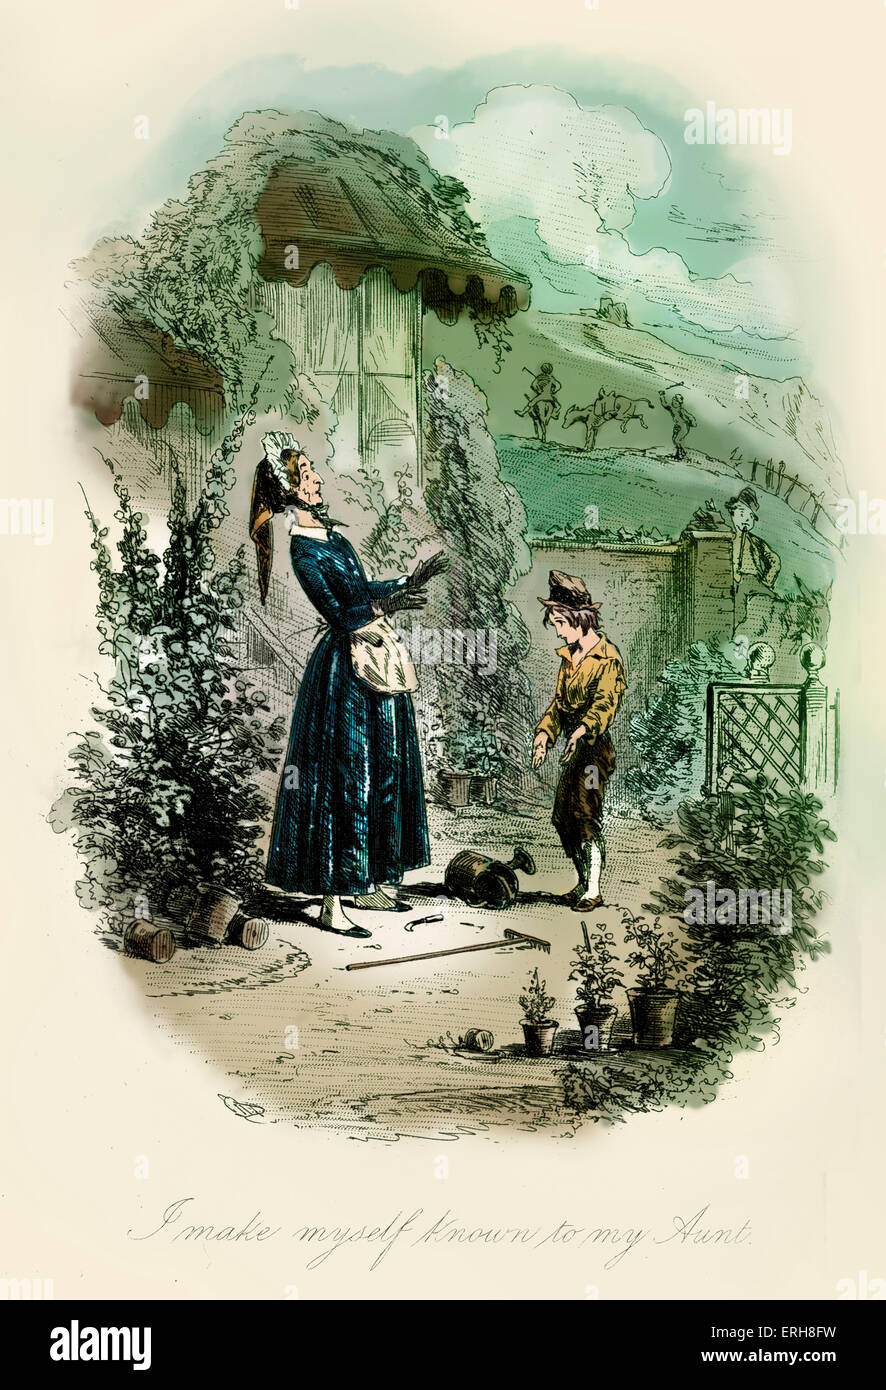 David Copperfield by Charles Dickens - illustration to chapter 8 by  H.K.Browne. Caption: 'I make myself known to my aunt' Stock Photo - Alamy